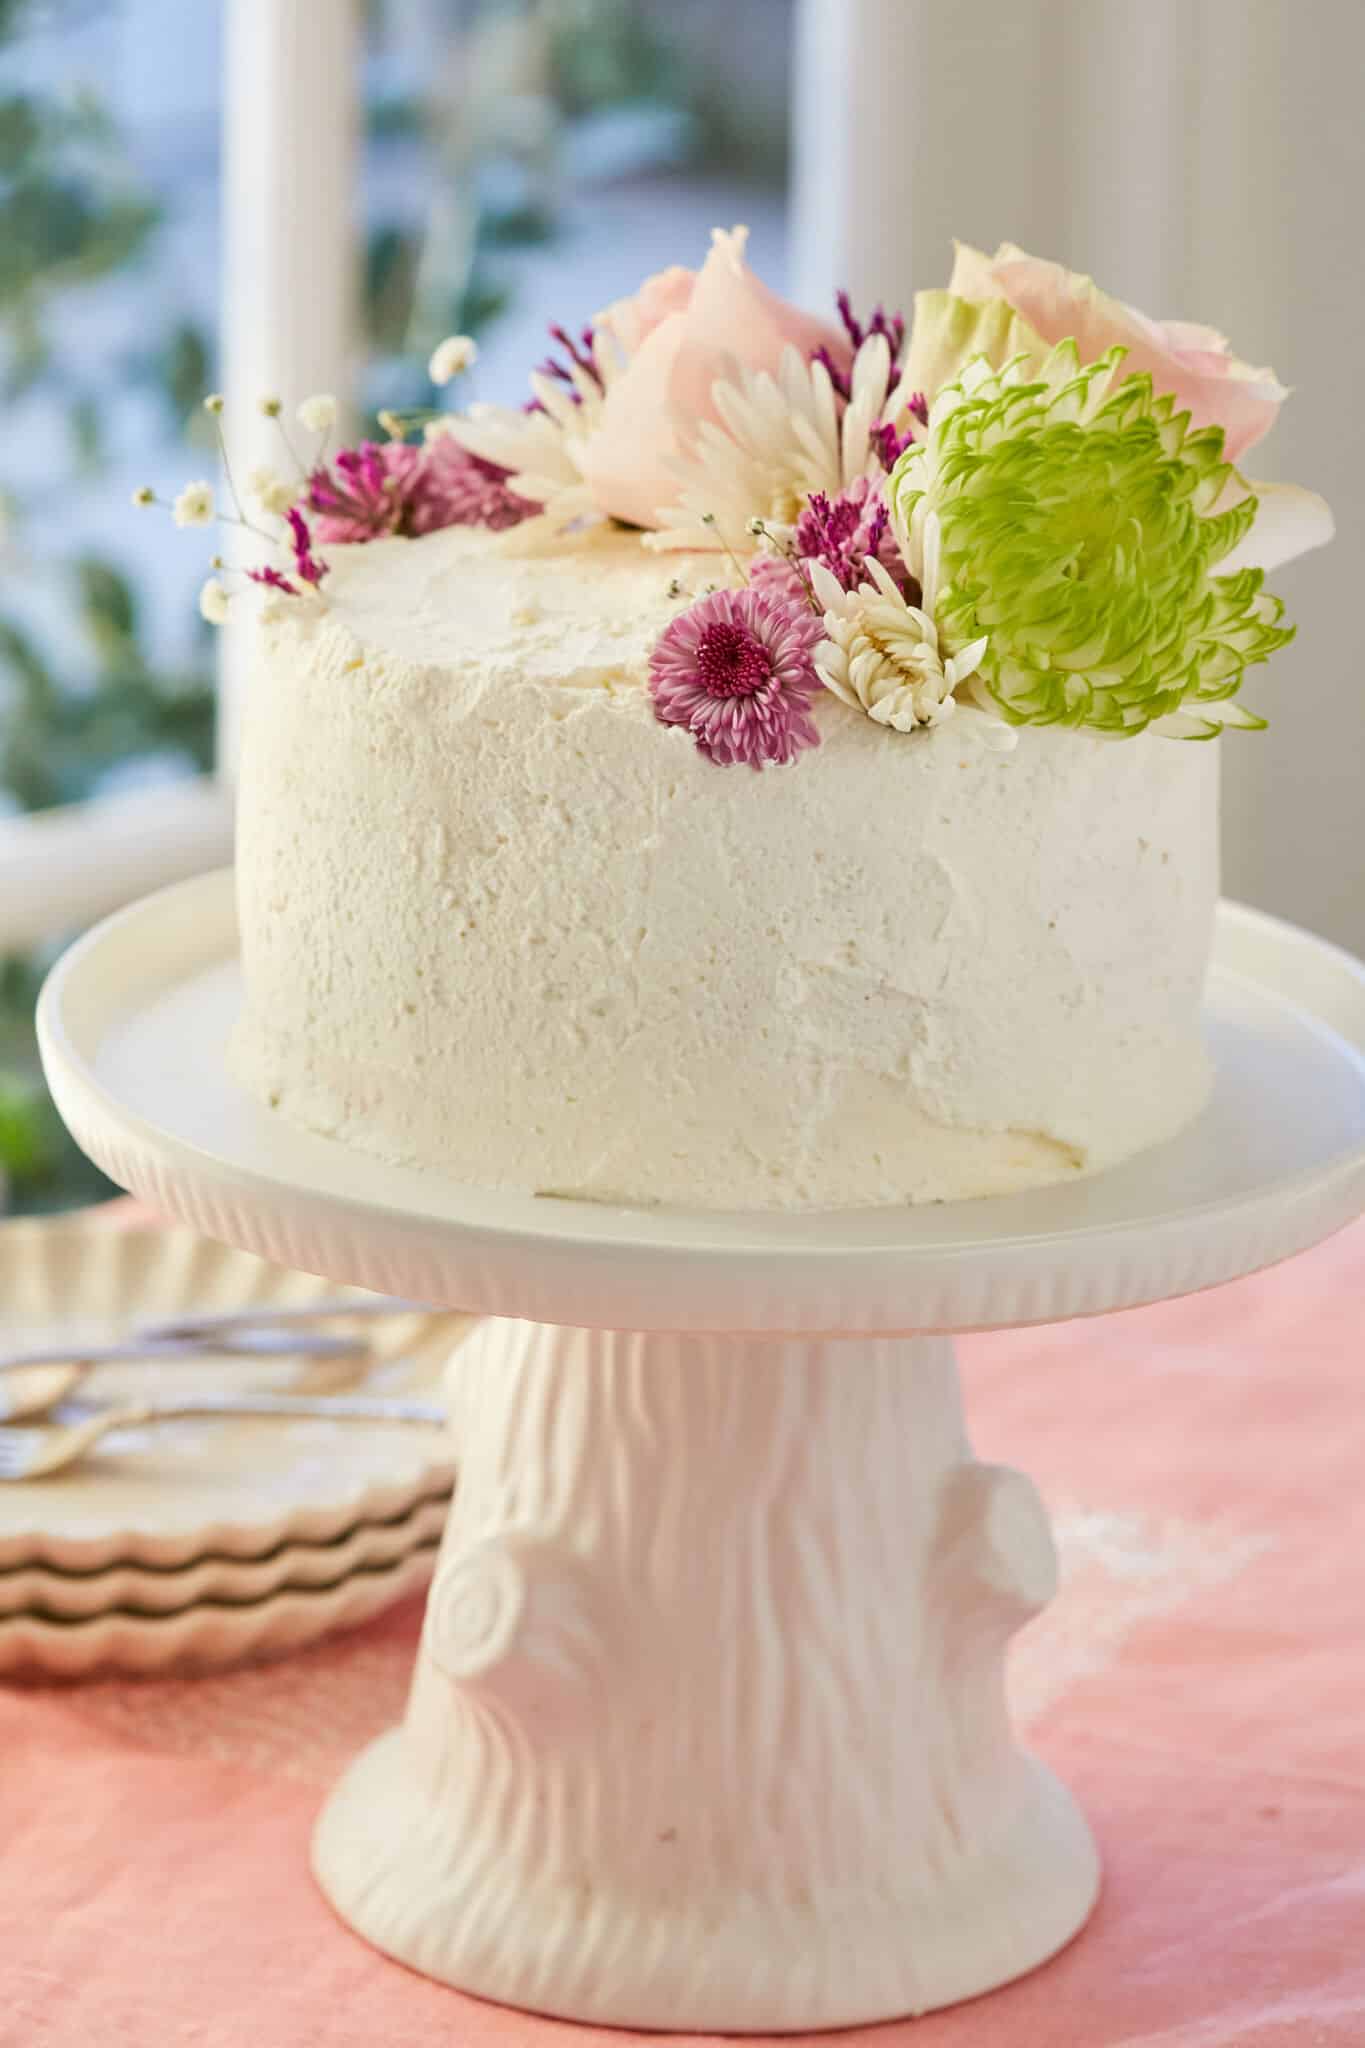 The Vertical Lemon Cake is a visually stunning, covered with white mascarpone whipped cream and topped with fresh colorful flowers . It's being displayed on a white tree-stump cake stand.